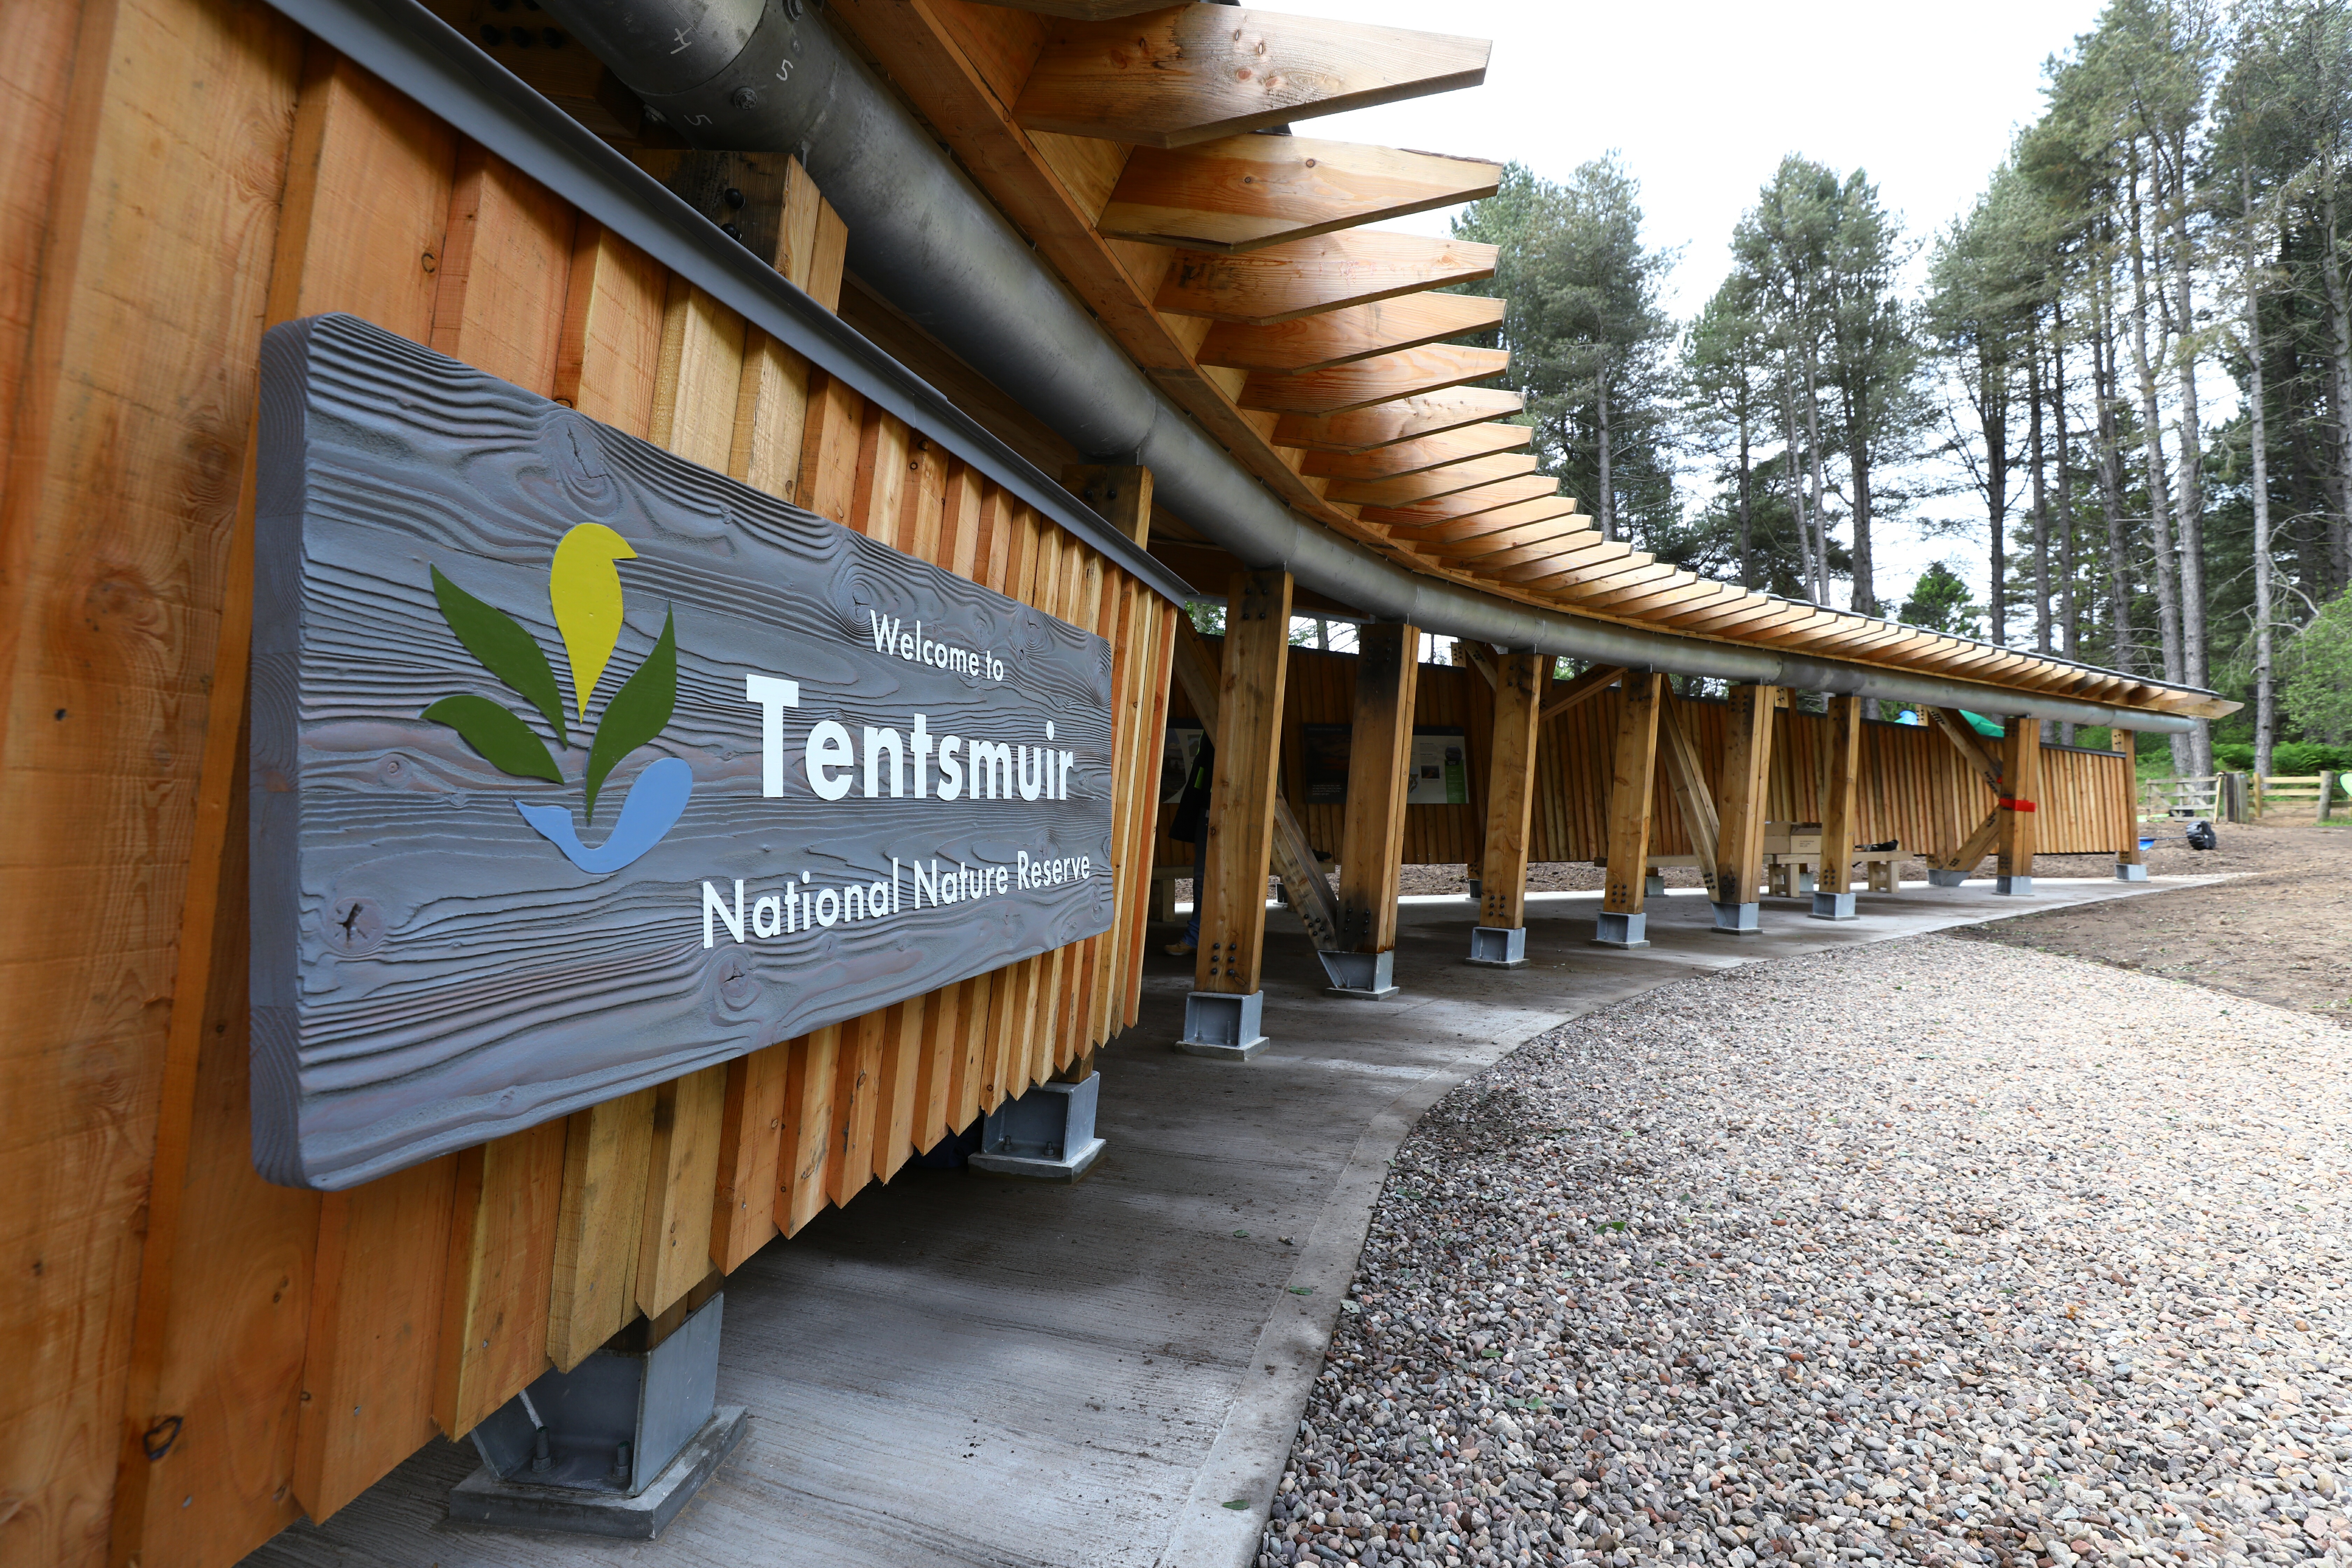 The new education and visitor pavilion at Tentsmuir National Nature Reserve.